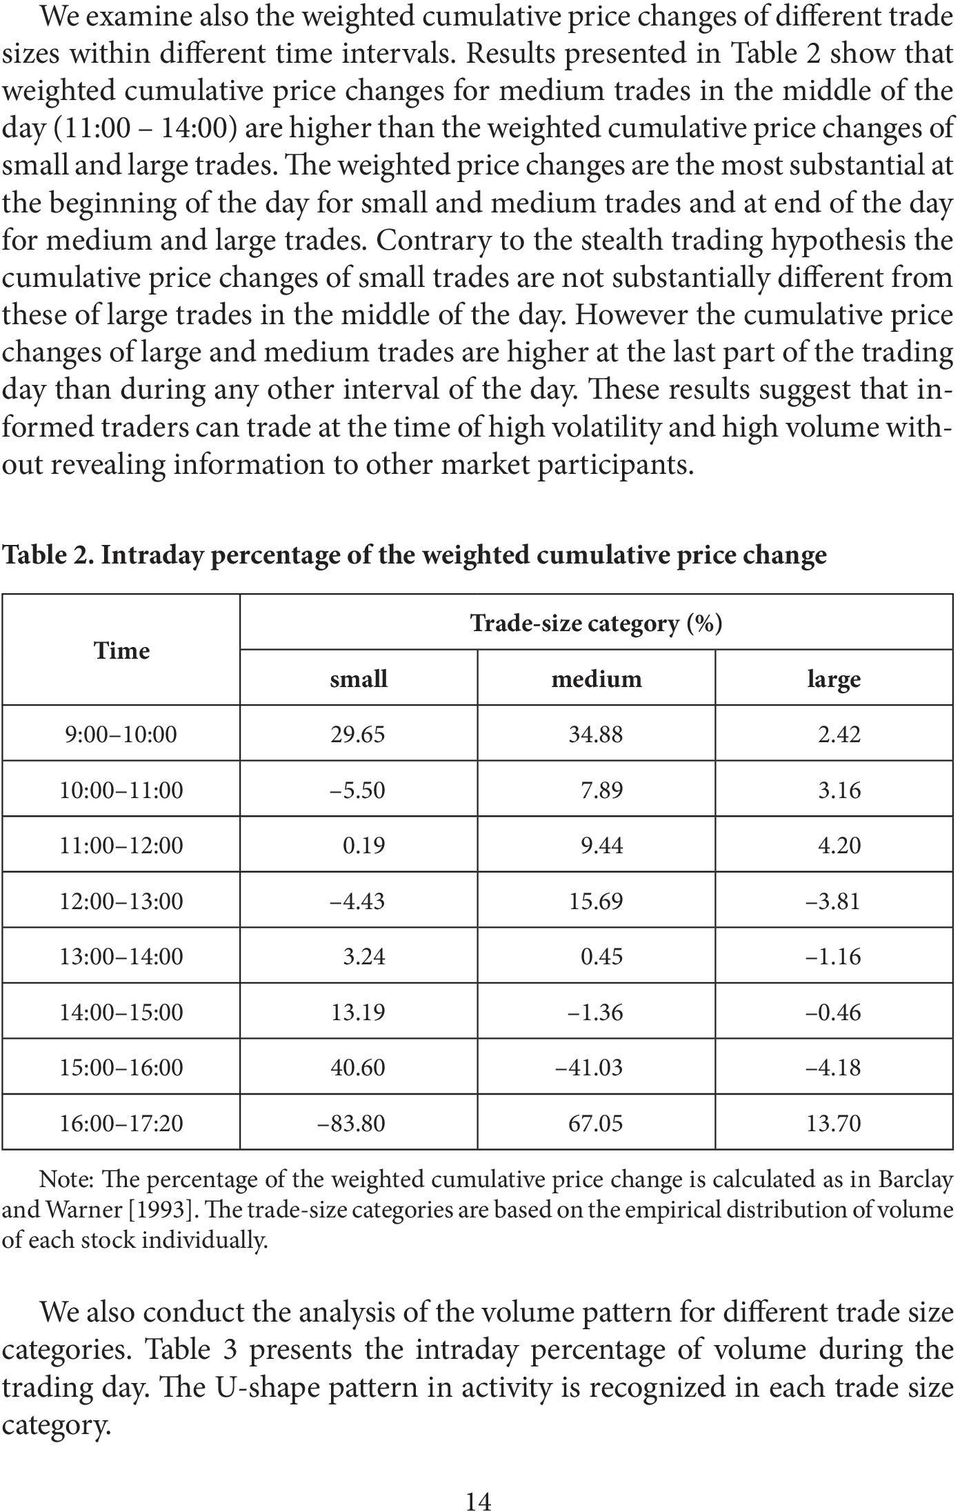 large trades. The weighted price changes are the most substantial at the beginning of the day for small and medium trades and at end of the day for medium and large trades.